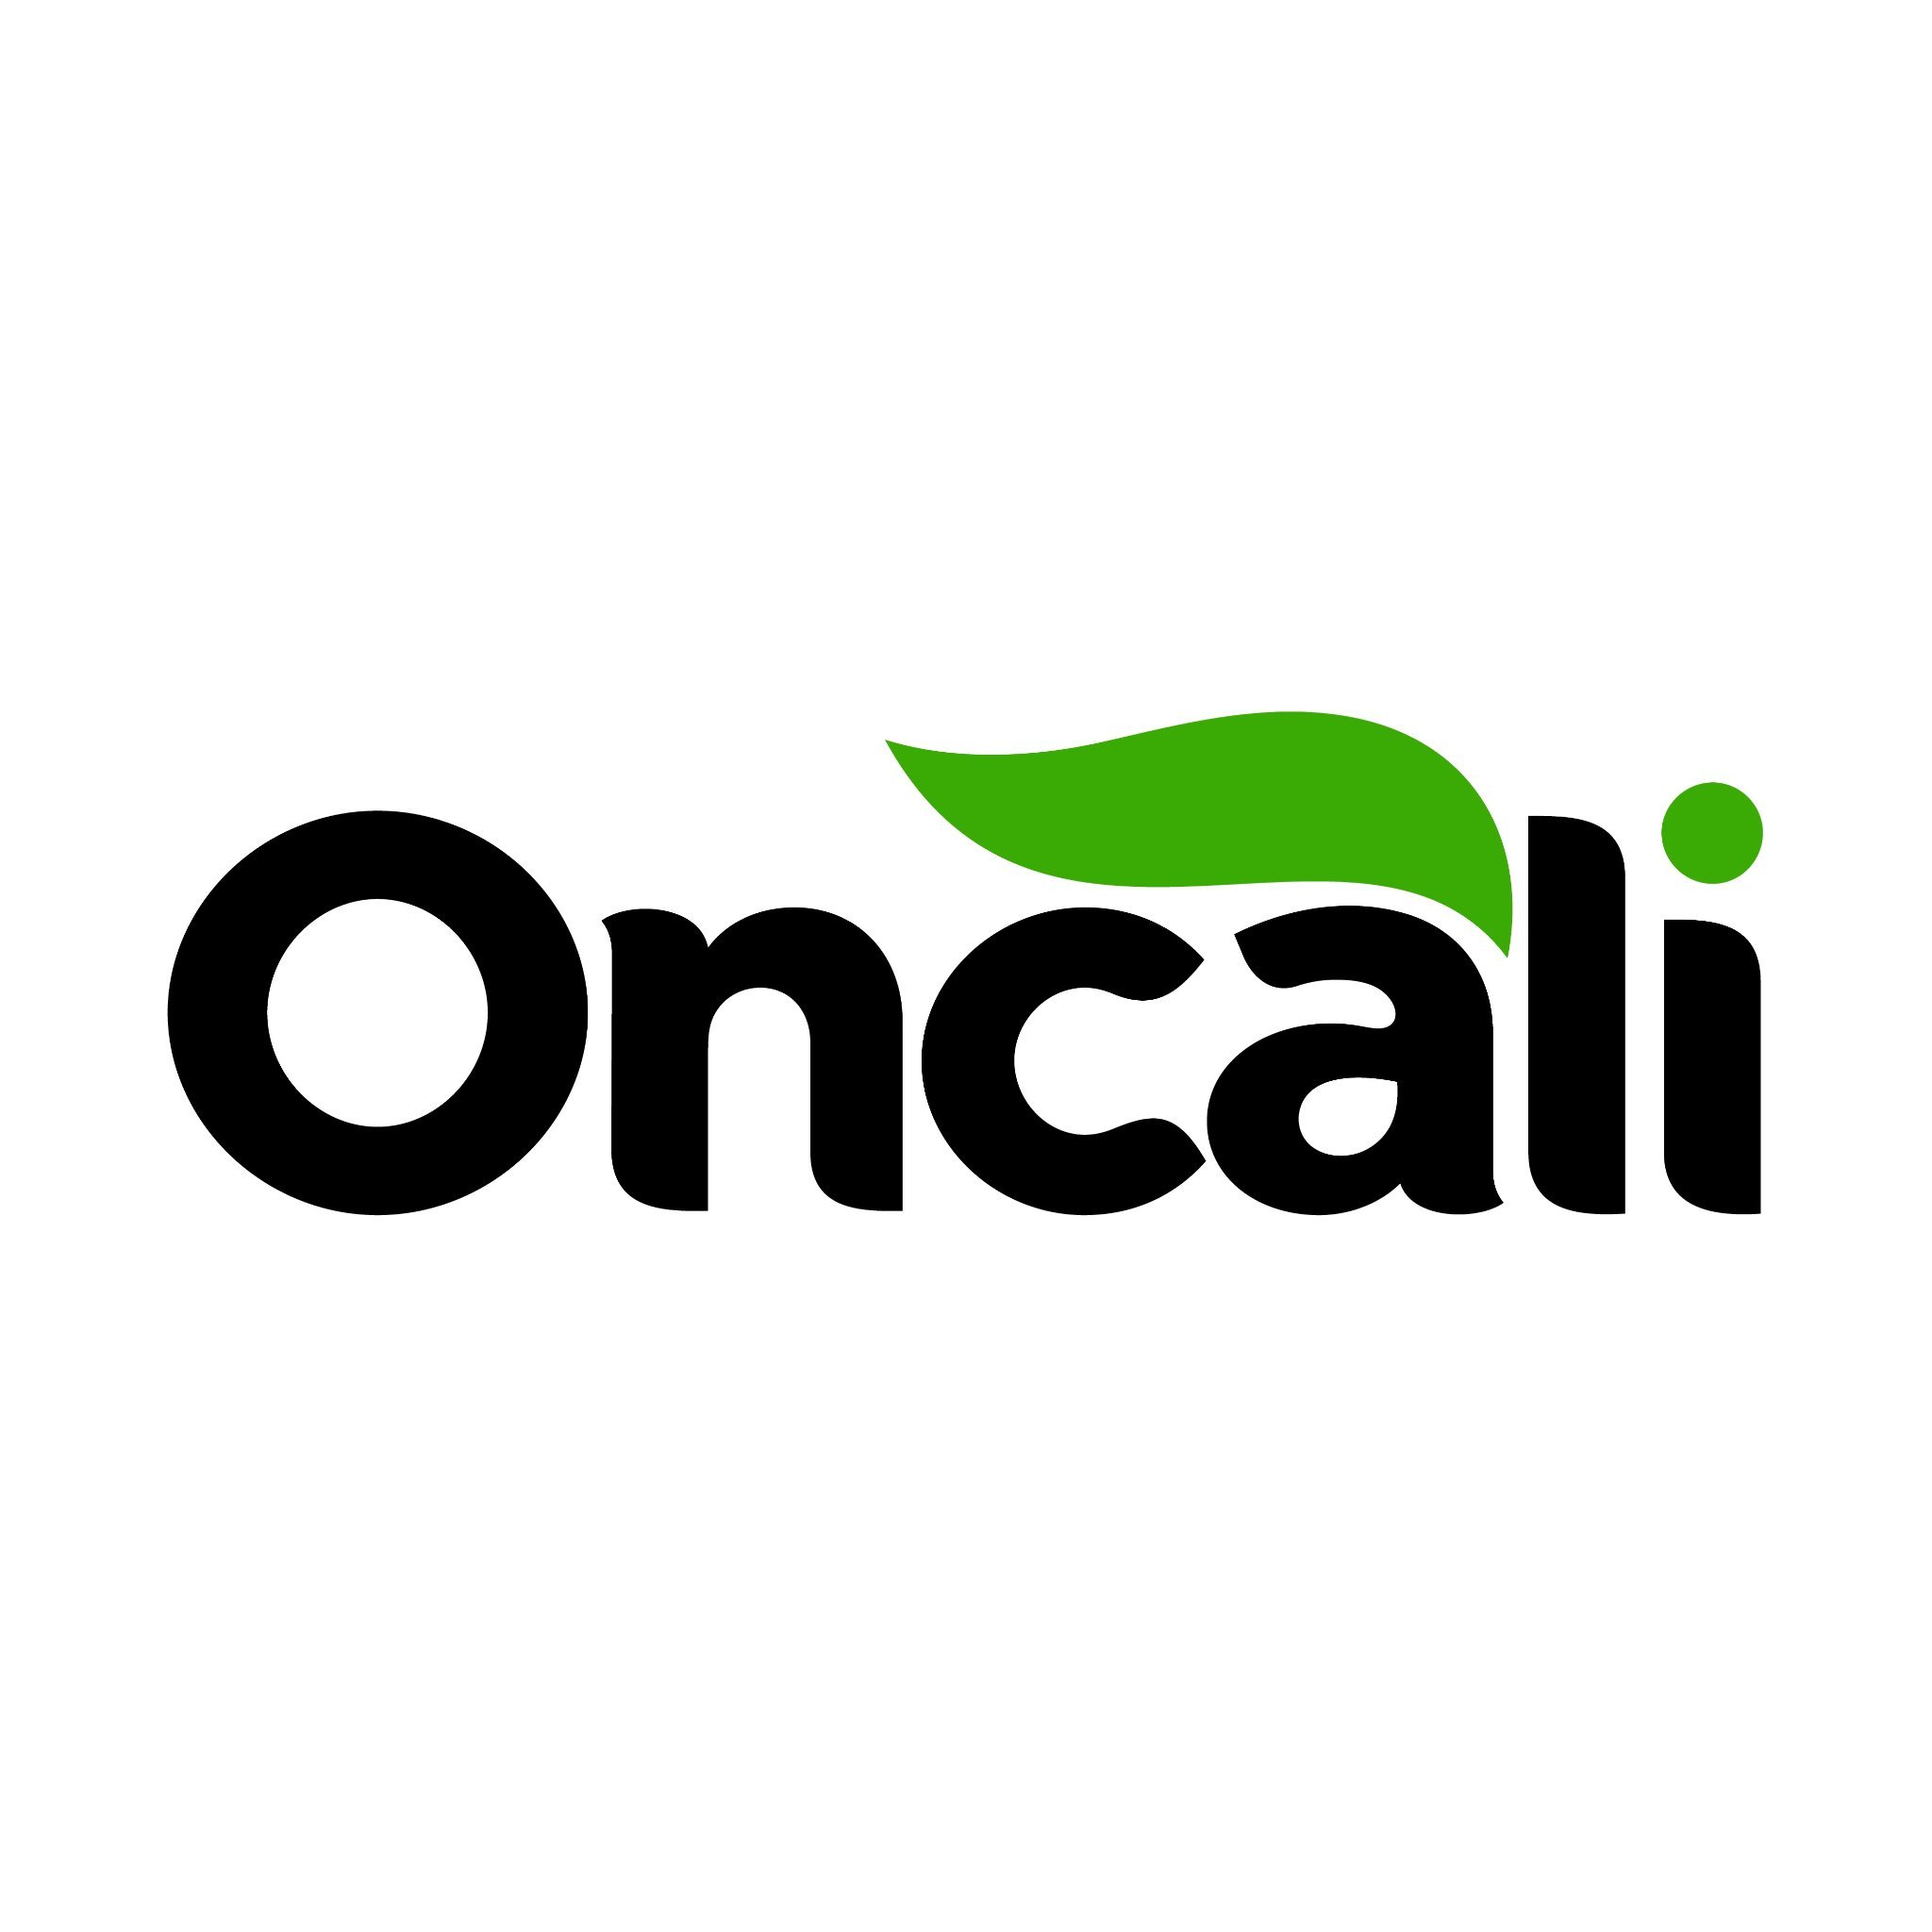 Founded in sunny California, Oncali delivers high quality cannabidiol (CBD) products with proper lab testing and a risk-free guarantee.